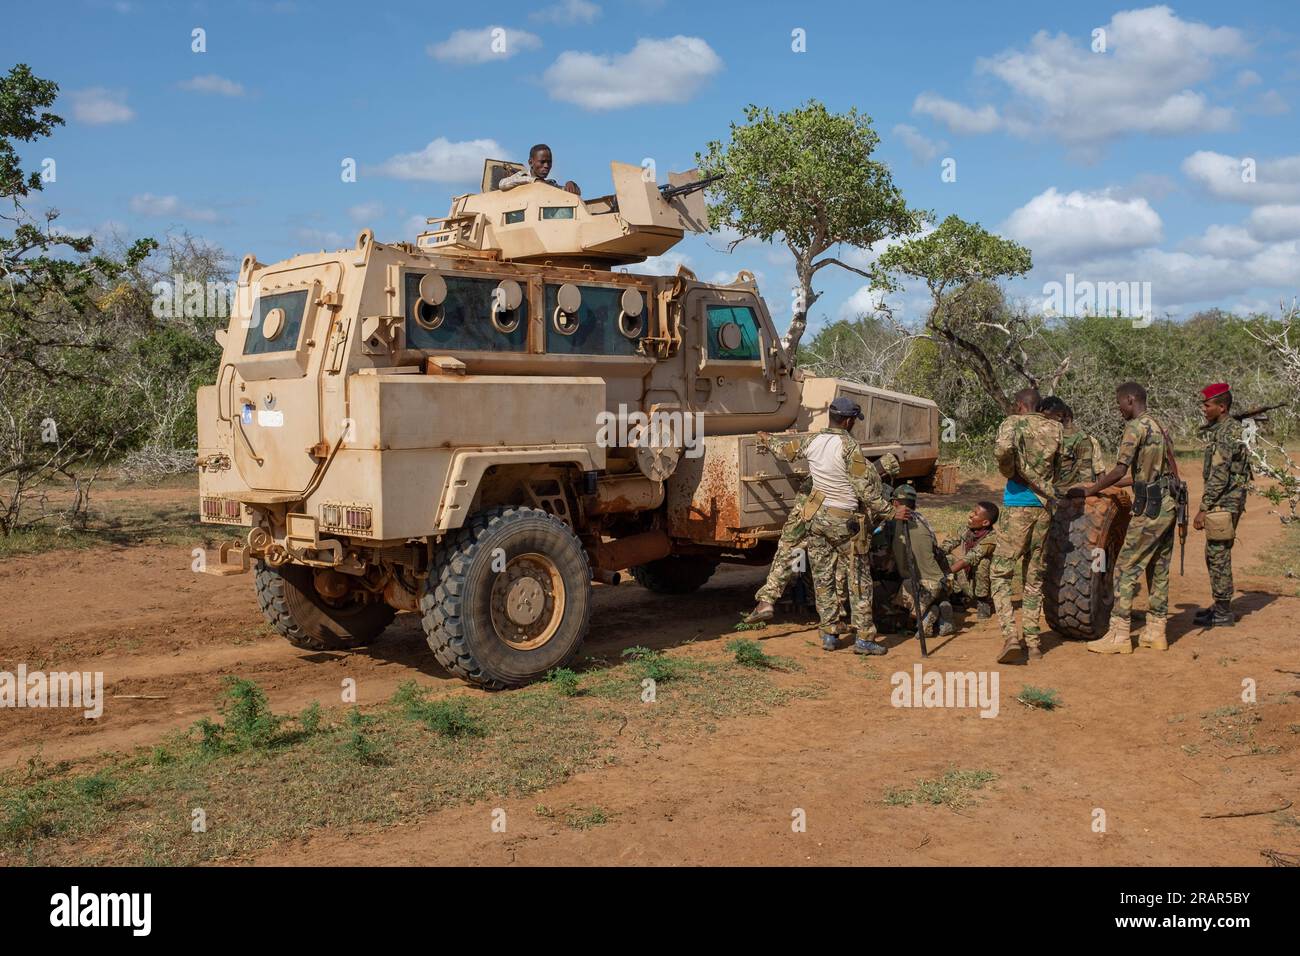 Somali soldiers change out a tyre on their Mamba APC in the bush, Southern Somalia Stock Photo